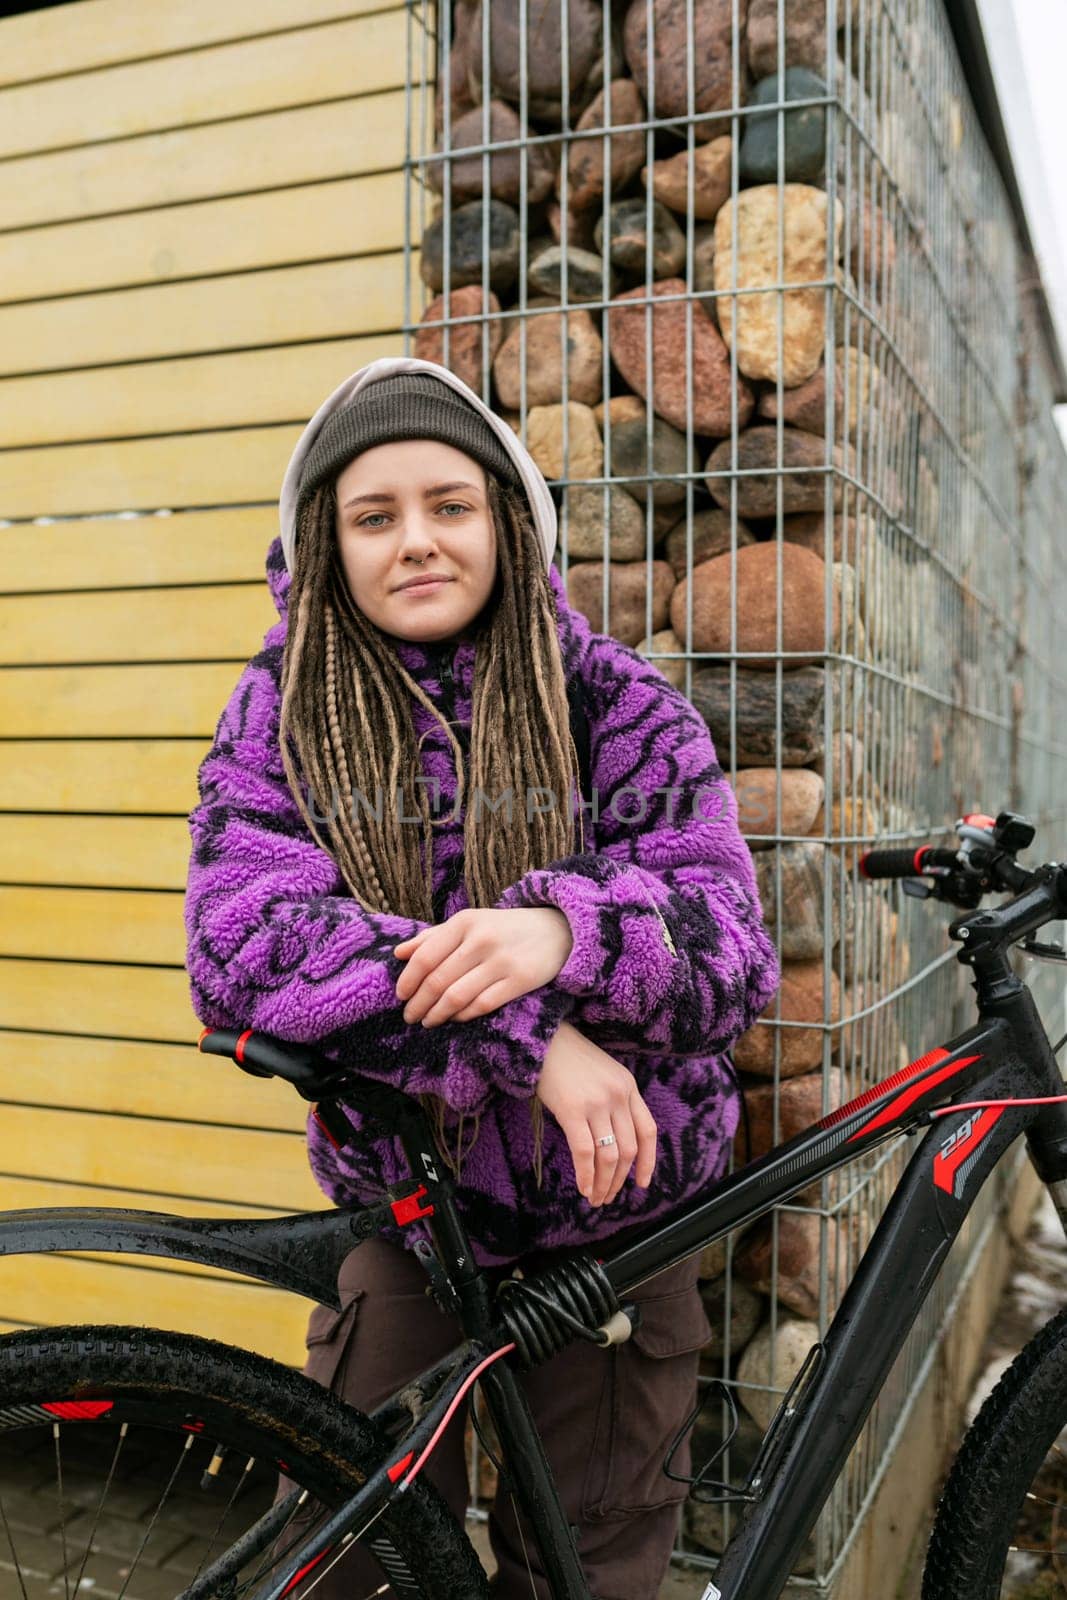 European stylish woman in an informal look with dreadlocks and piercings moves around the city on a bicycle.